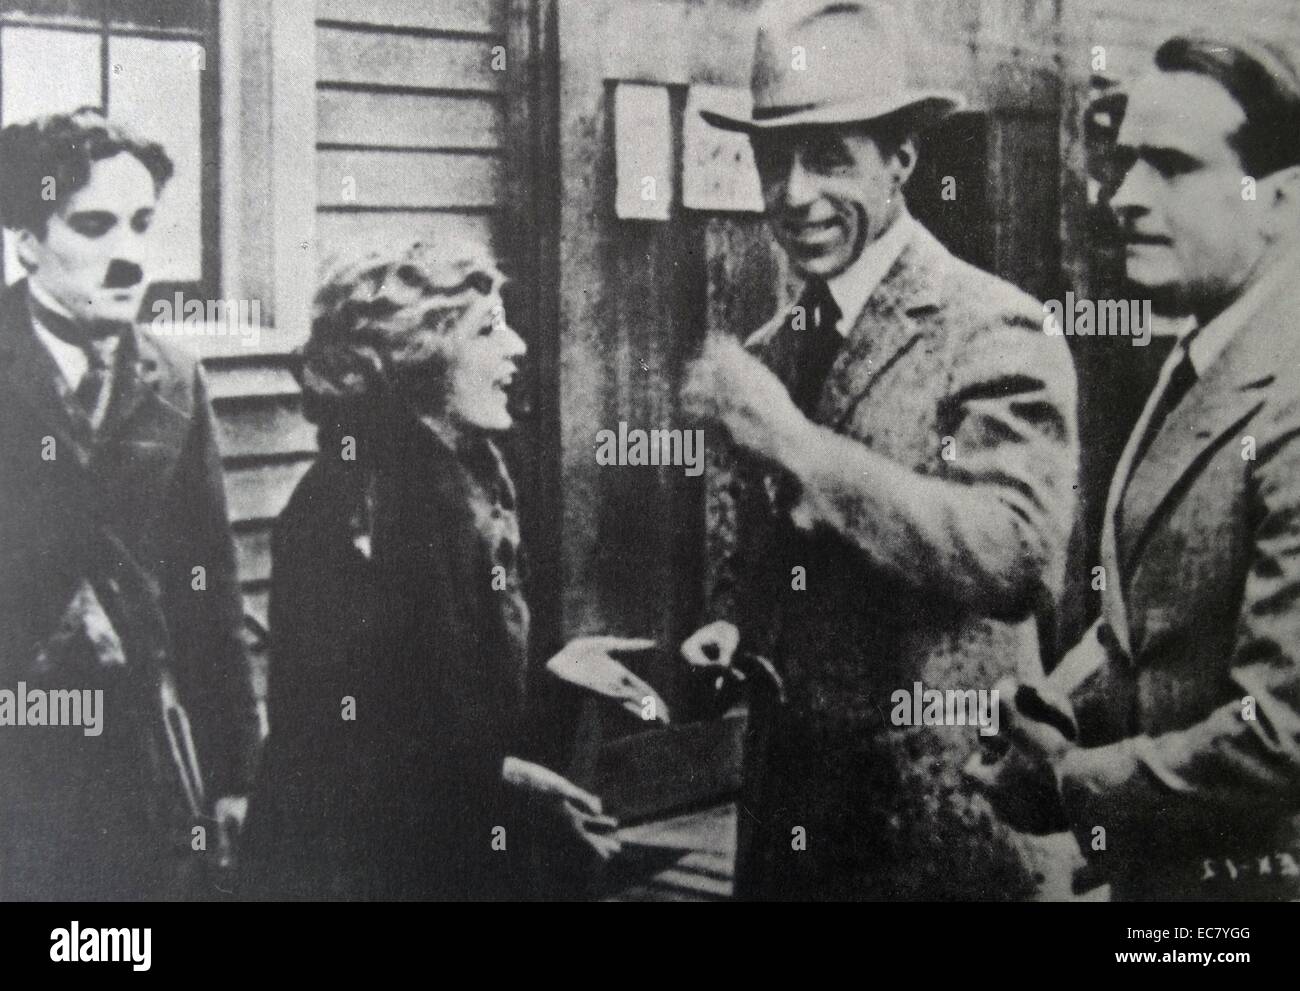 Charles Chaplin, Mary Pickford, D.W. Griffith et Douglas Fairbanks. Banque D'Images